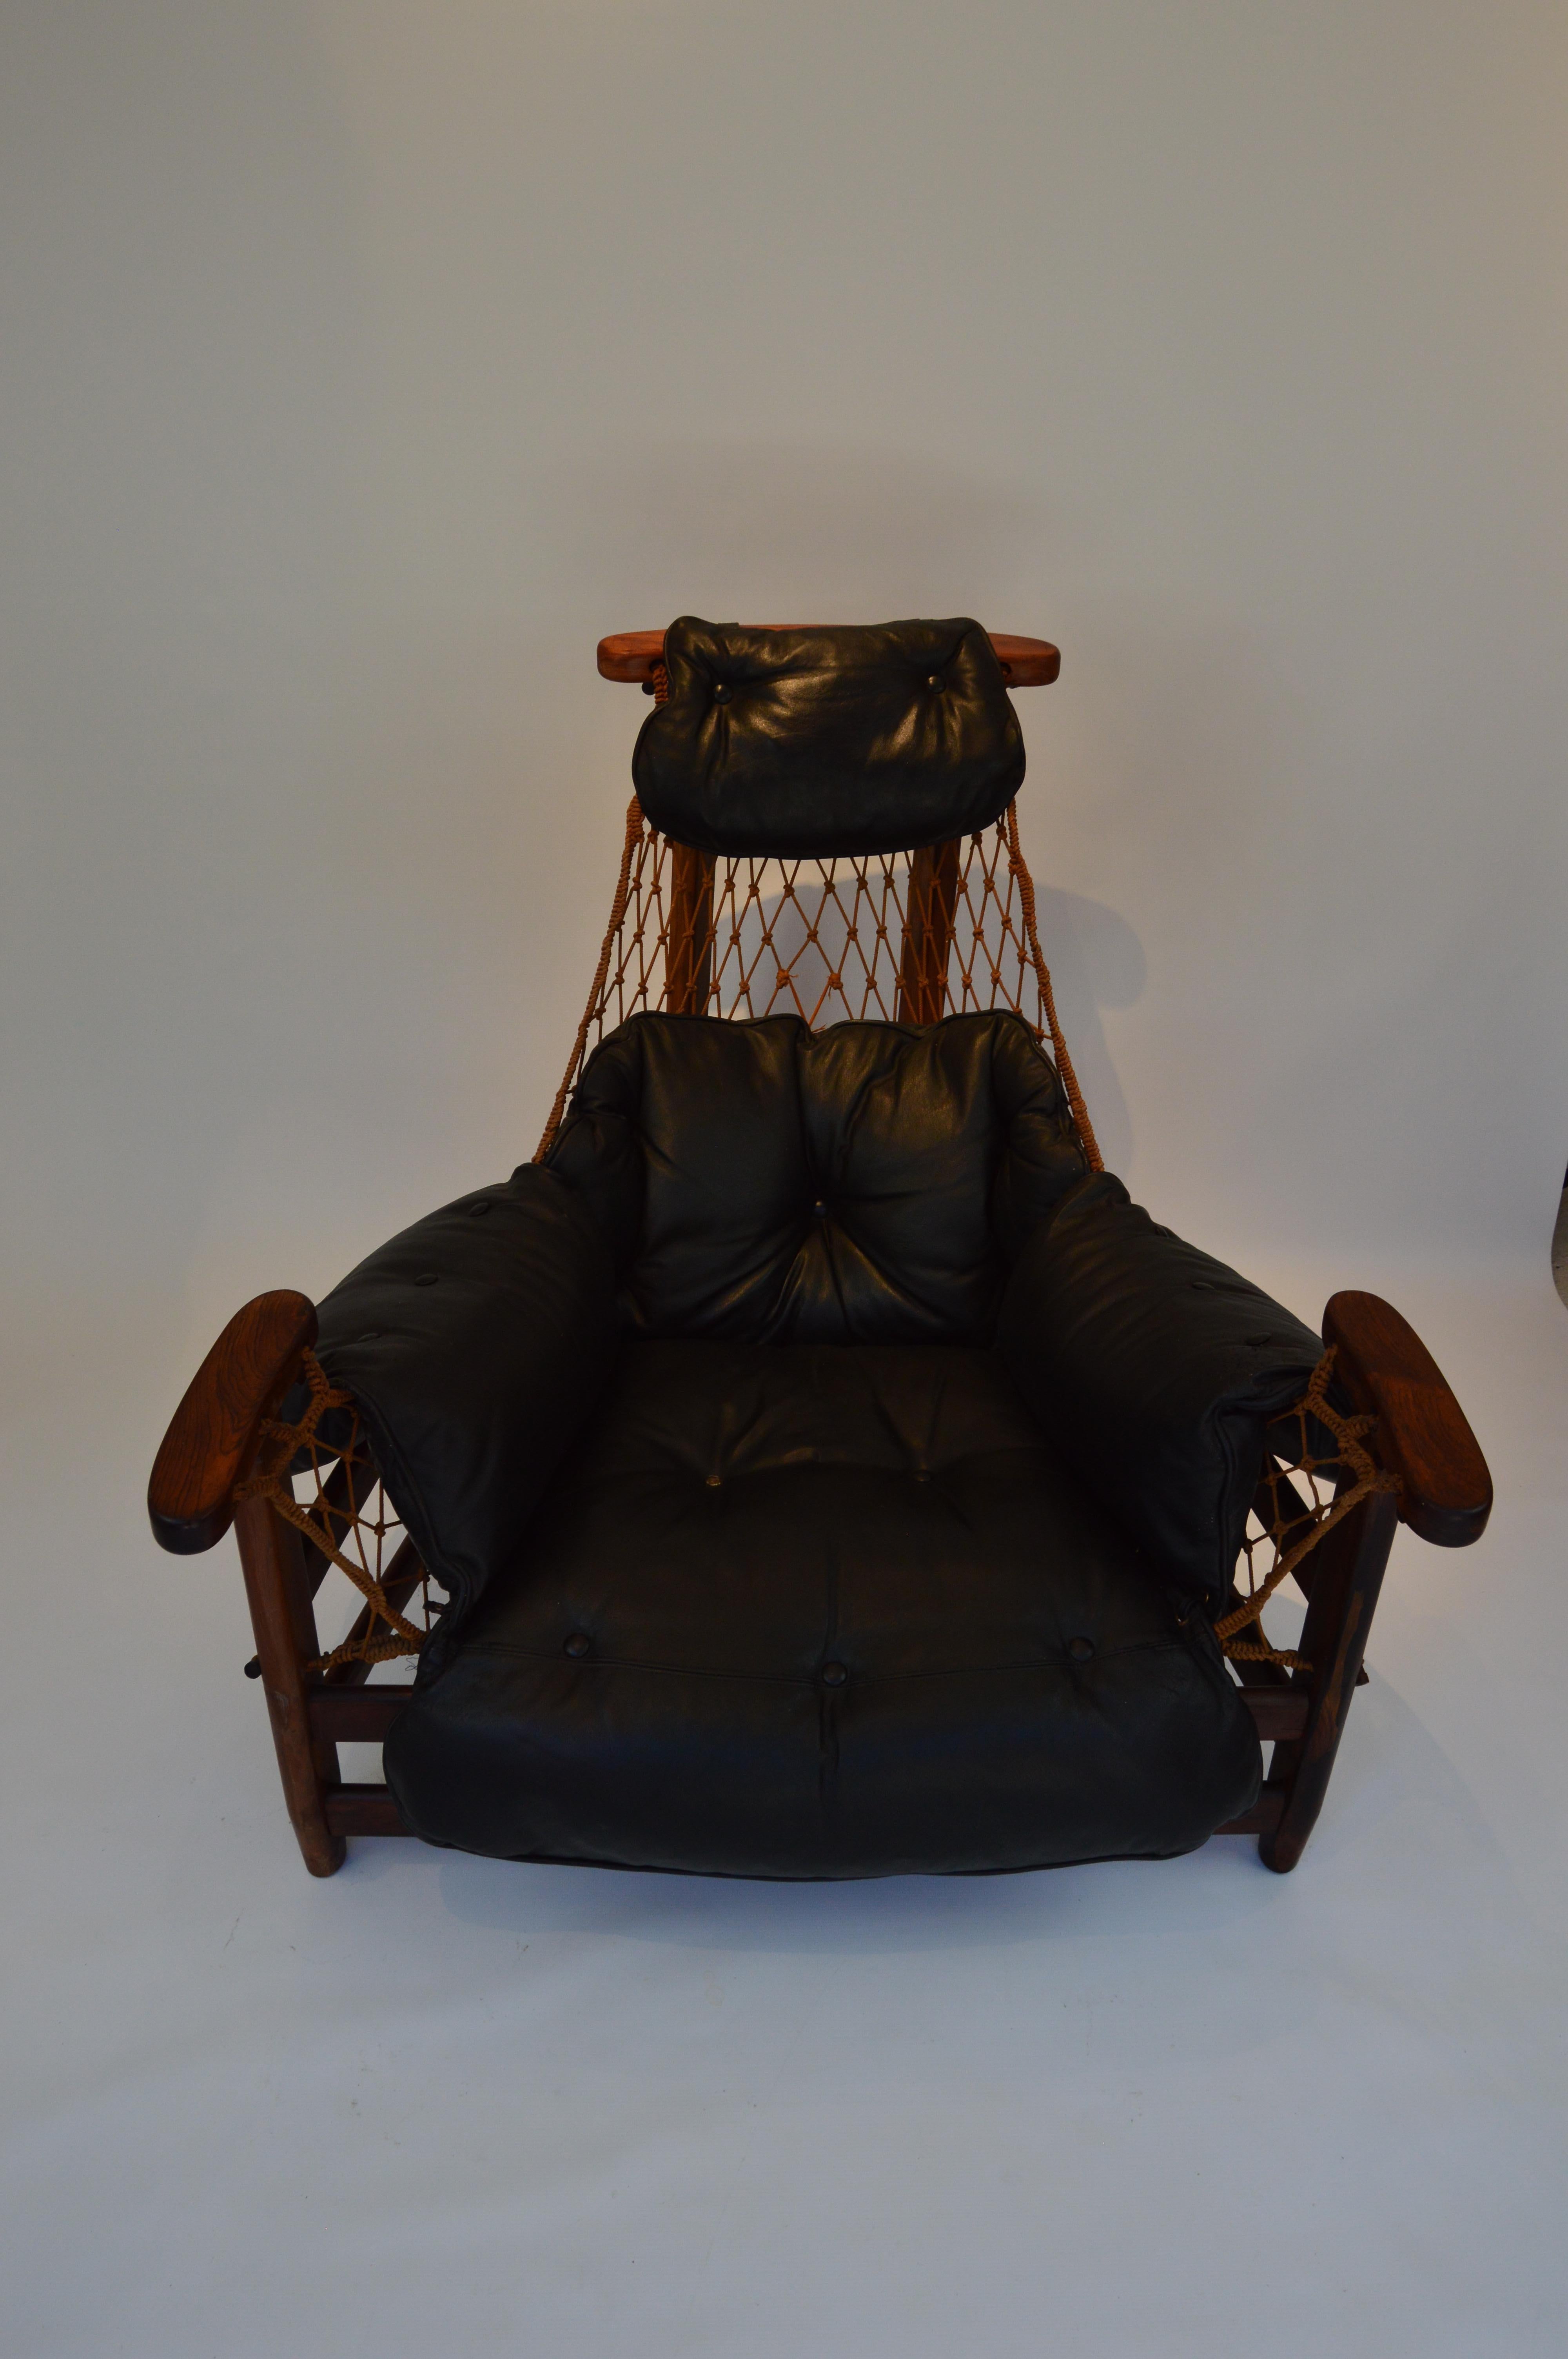 Mid-Century Modern “Jangada” lounge chair designed by Jean Gillon and produced in Brazilian rosewood and original black patinated leather. Inspired by his trips to Bahia, his designs are representative of Brazilian modernism. The “Jaganda” chair was